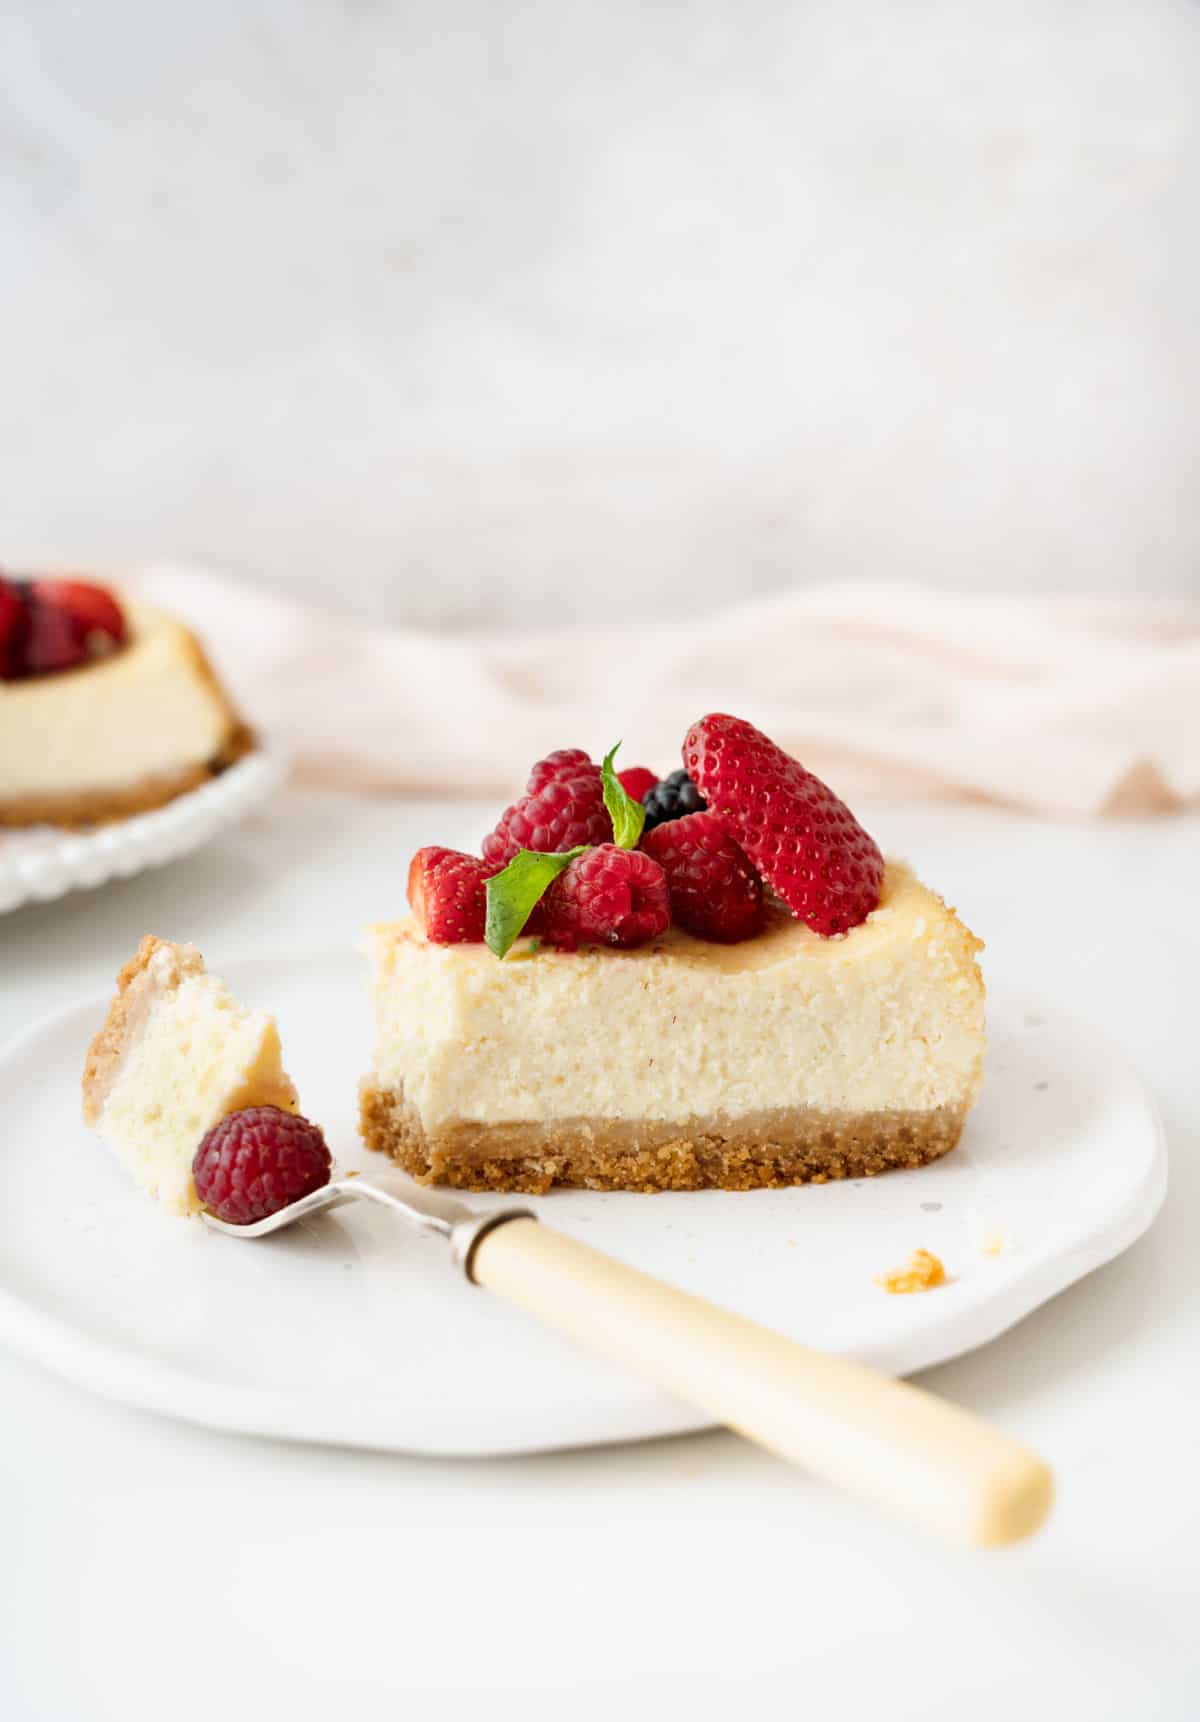 Slice of ricotta berry cheesecake on a white plate with bite in a fork. Light grey, pink, and white surface and background. 